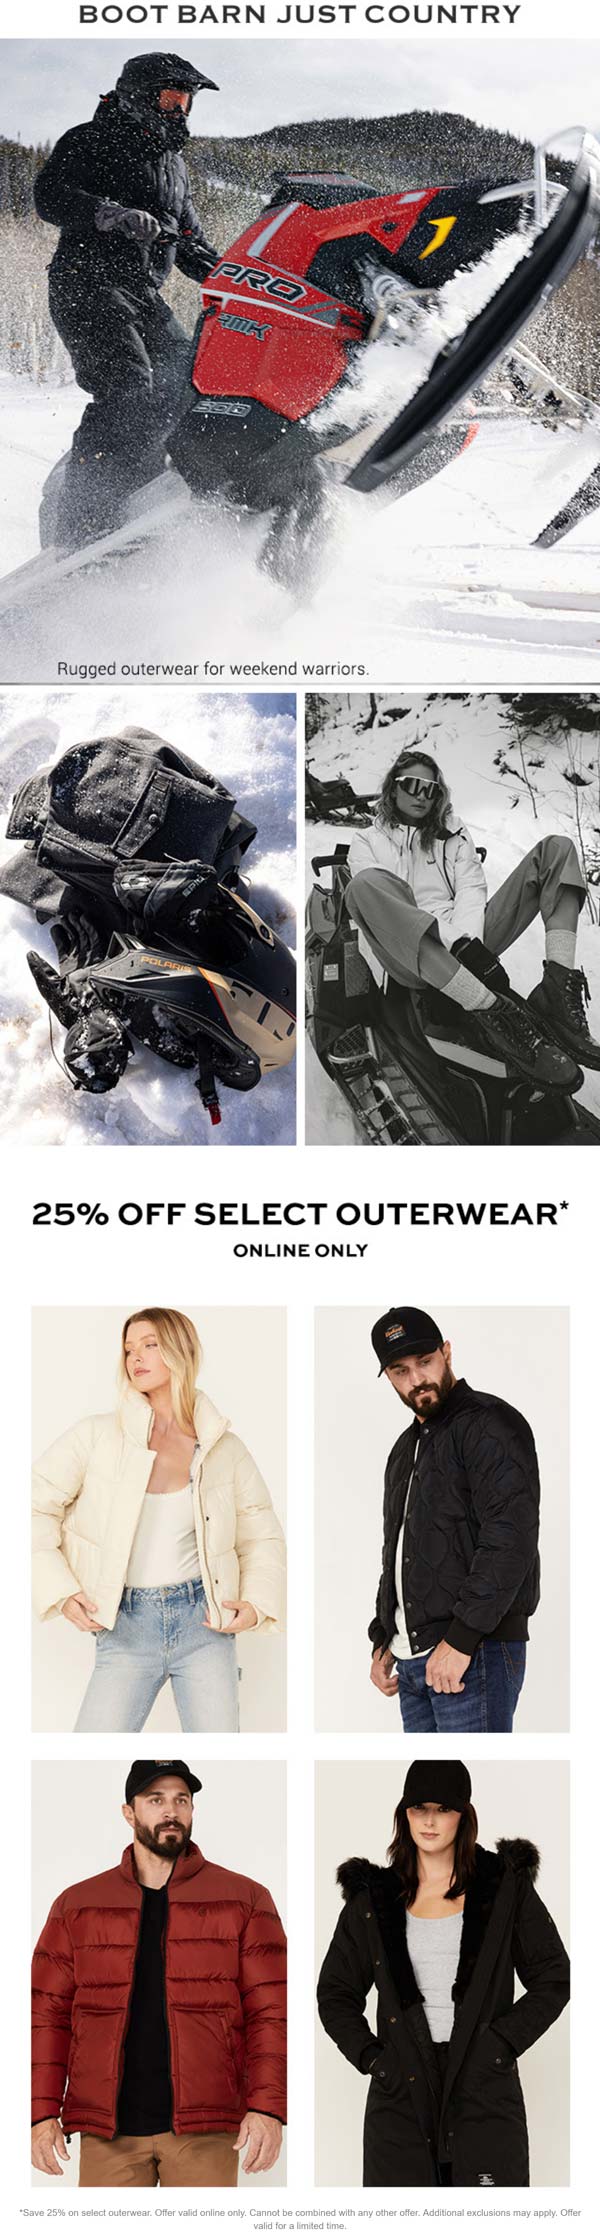 Boot Barn stores Coupon  25% off outerwear online at Boot Barn #bootbarn 